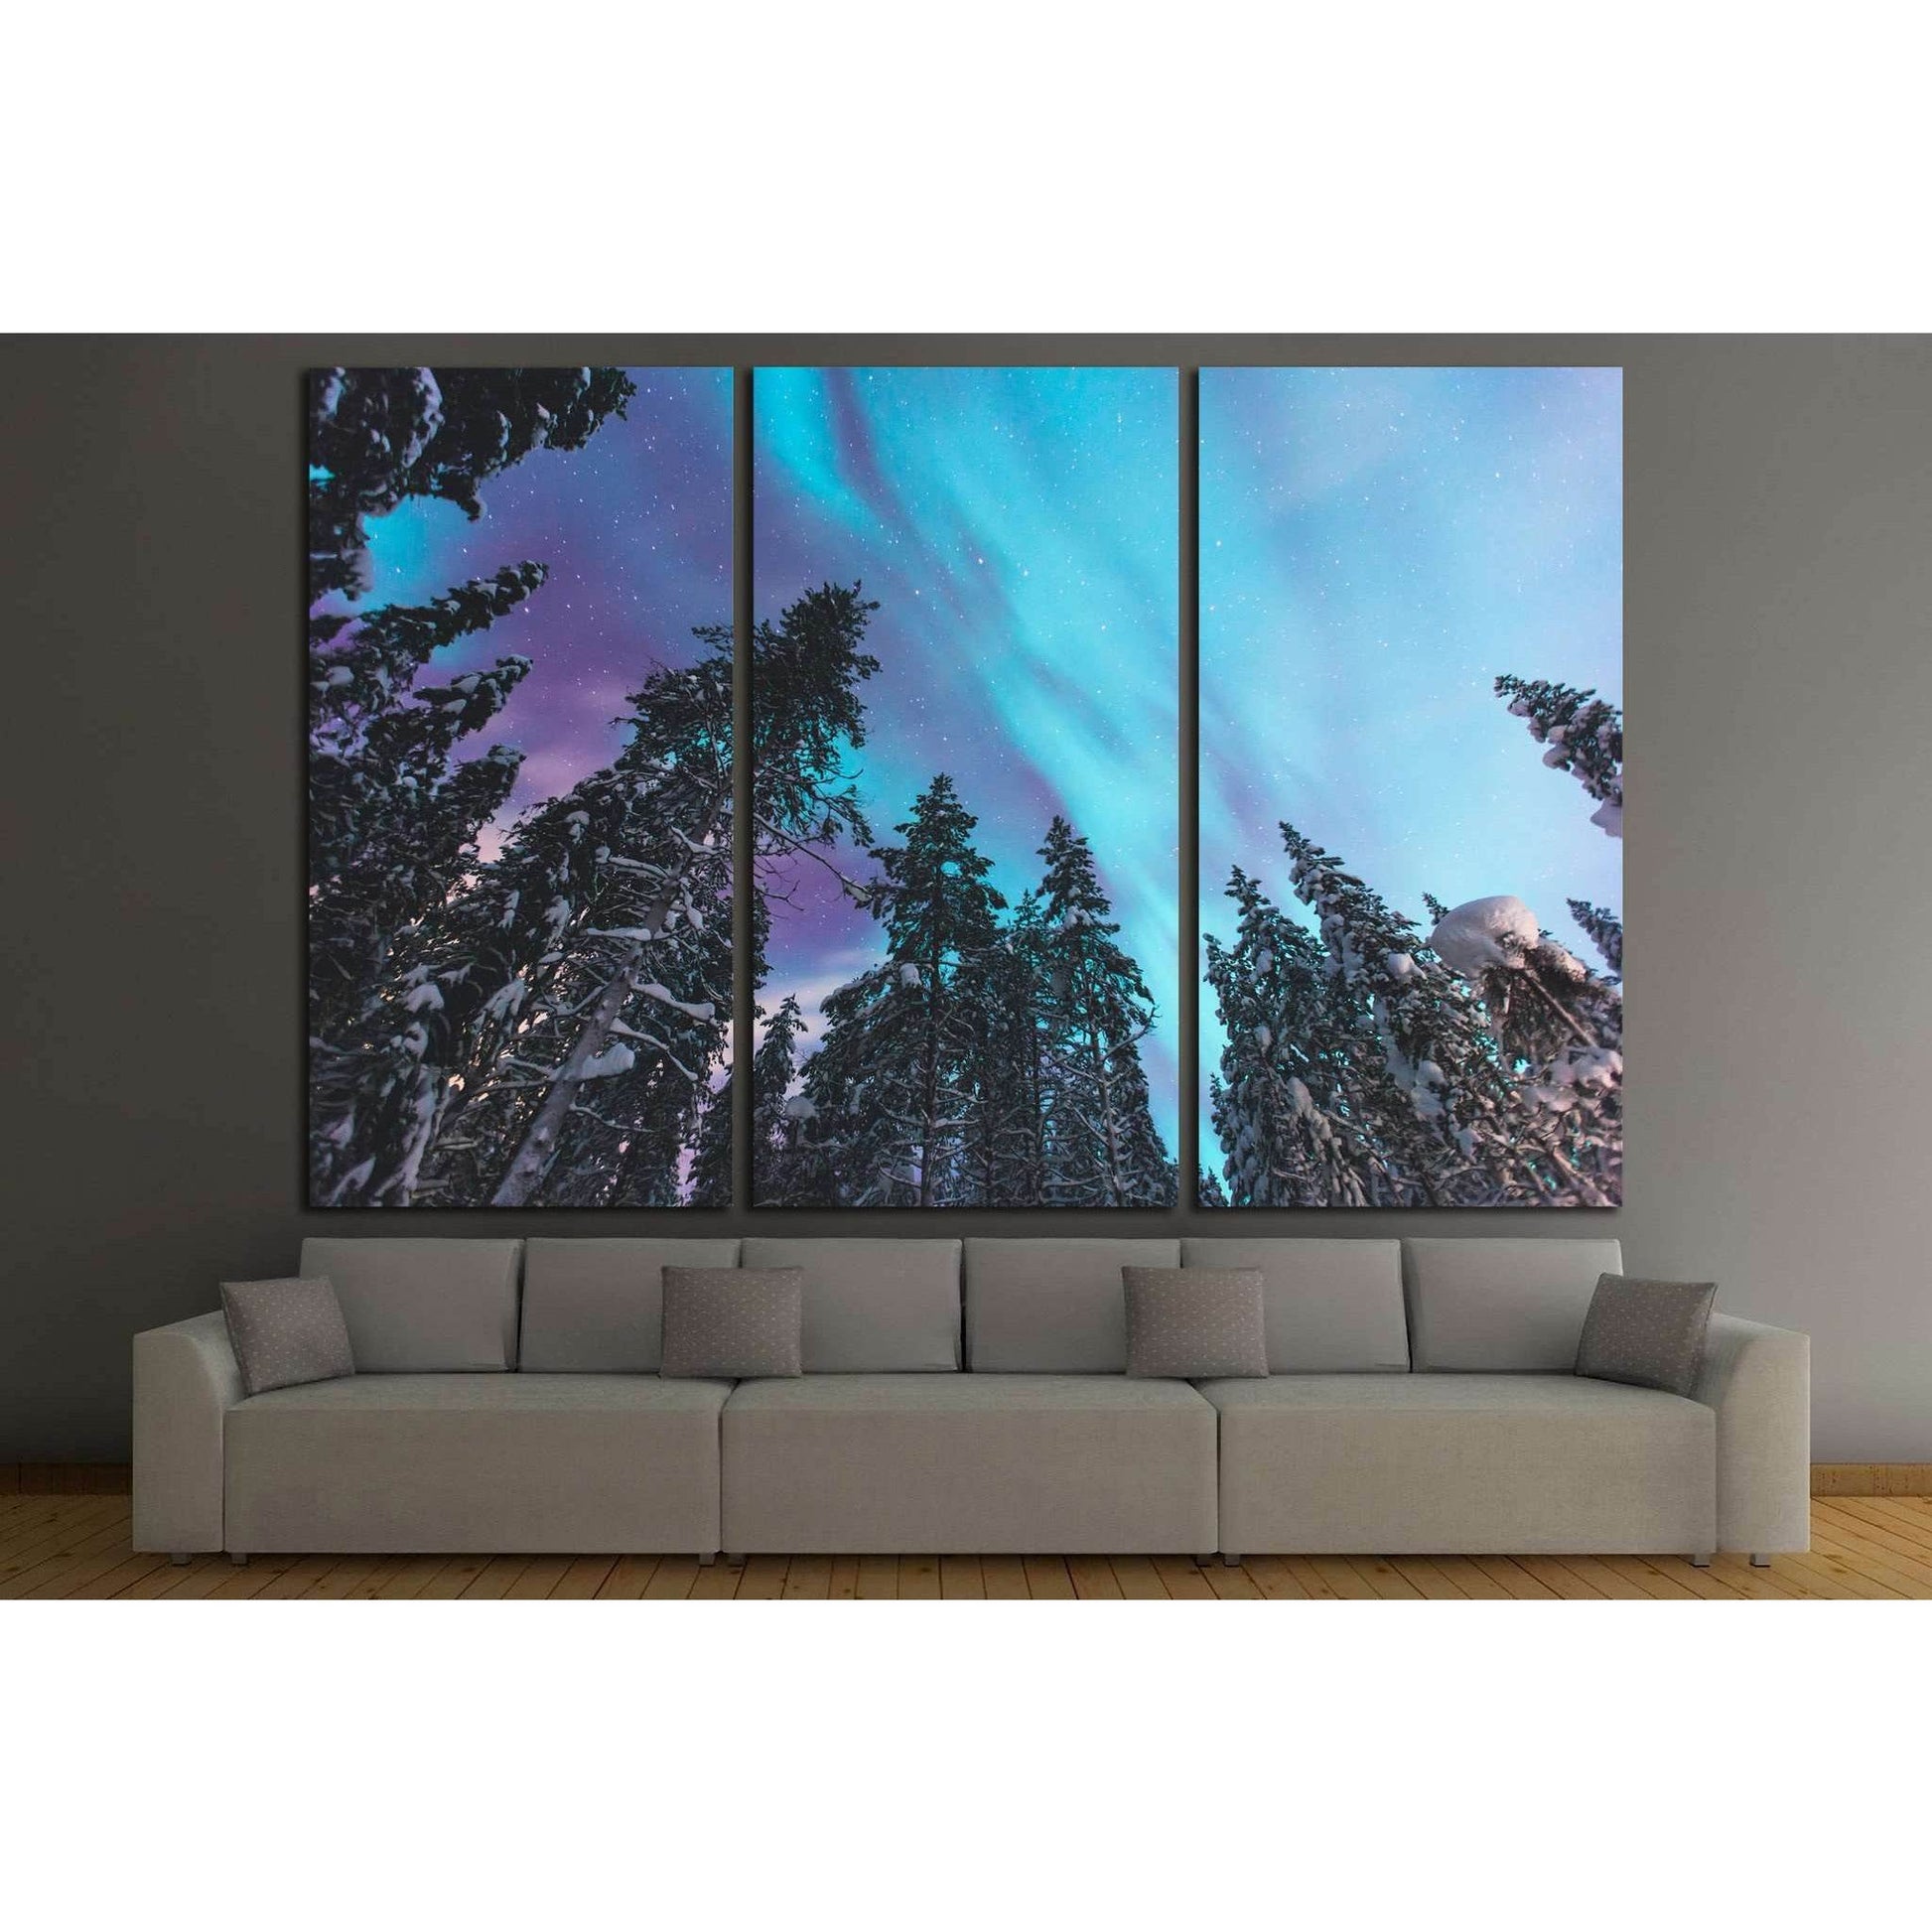 Cosmic Dance of Northern Lights Artwork for Boutique Hotel DecorThis canvas print artfully depicts the Northern Lights dancing over a forest of pine trees, with the cosmic palette of blues and purples set against the dark silhouettes of the trees. It is a